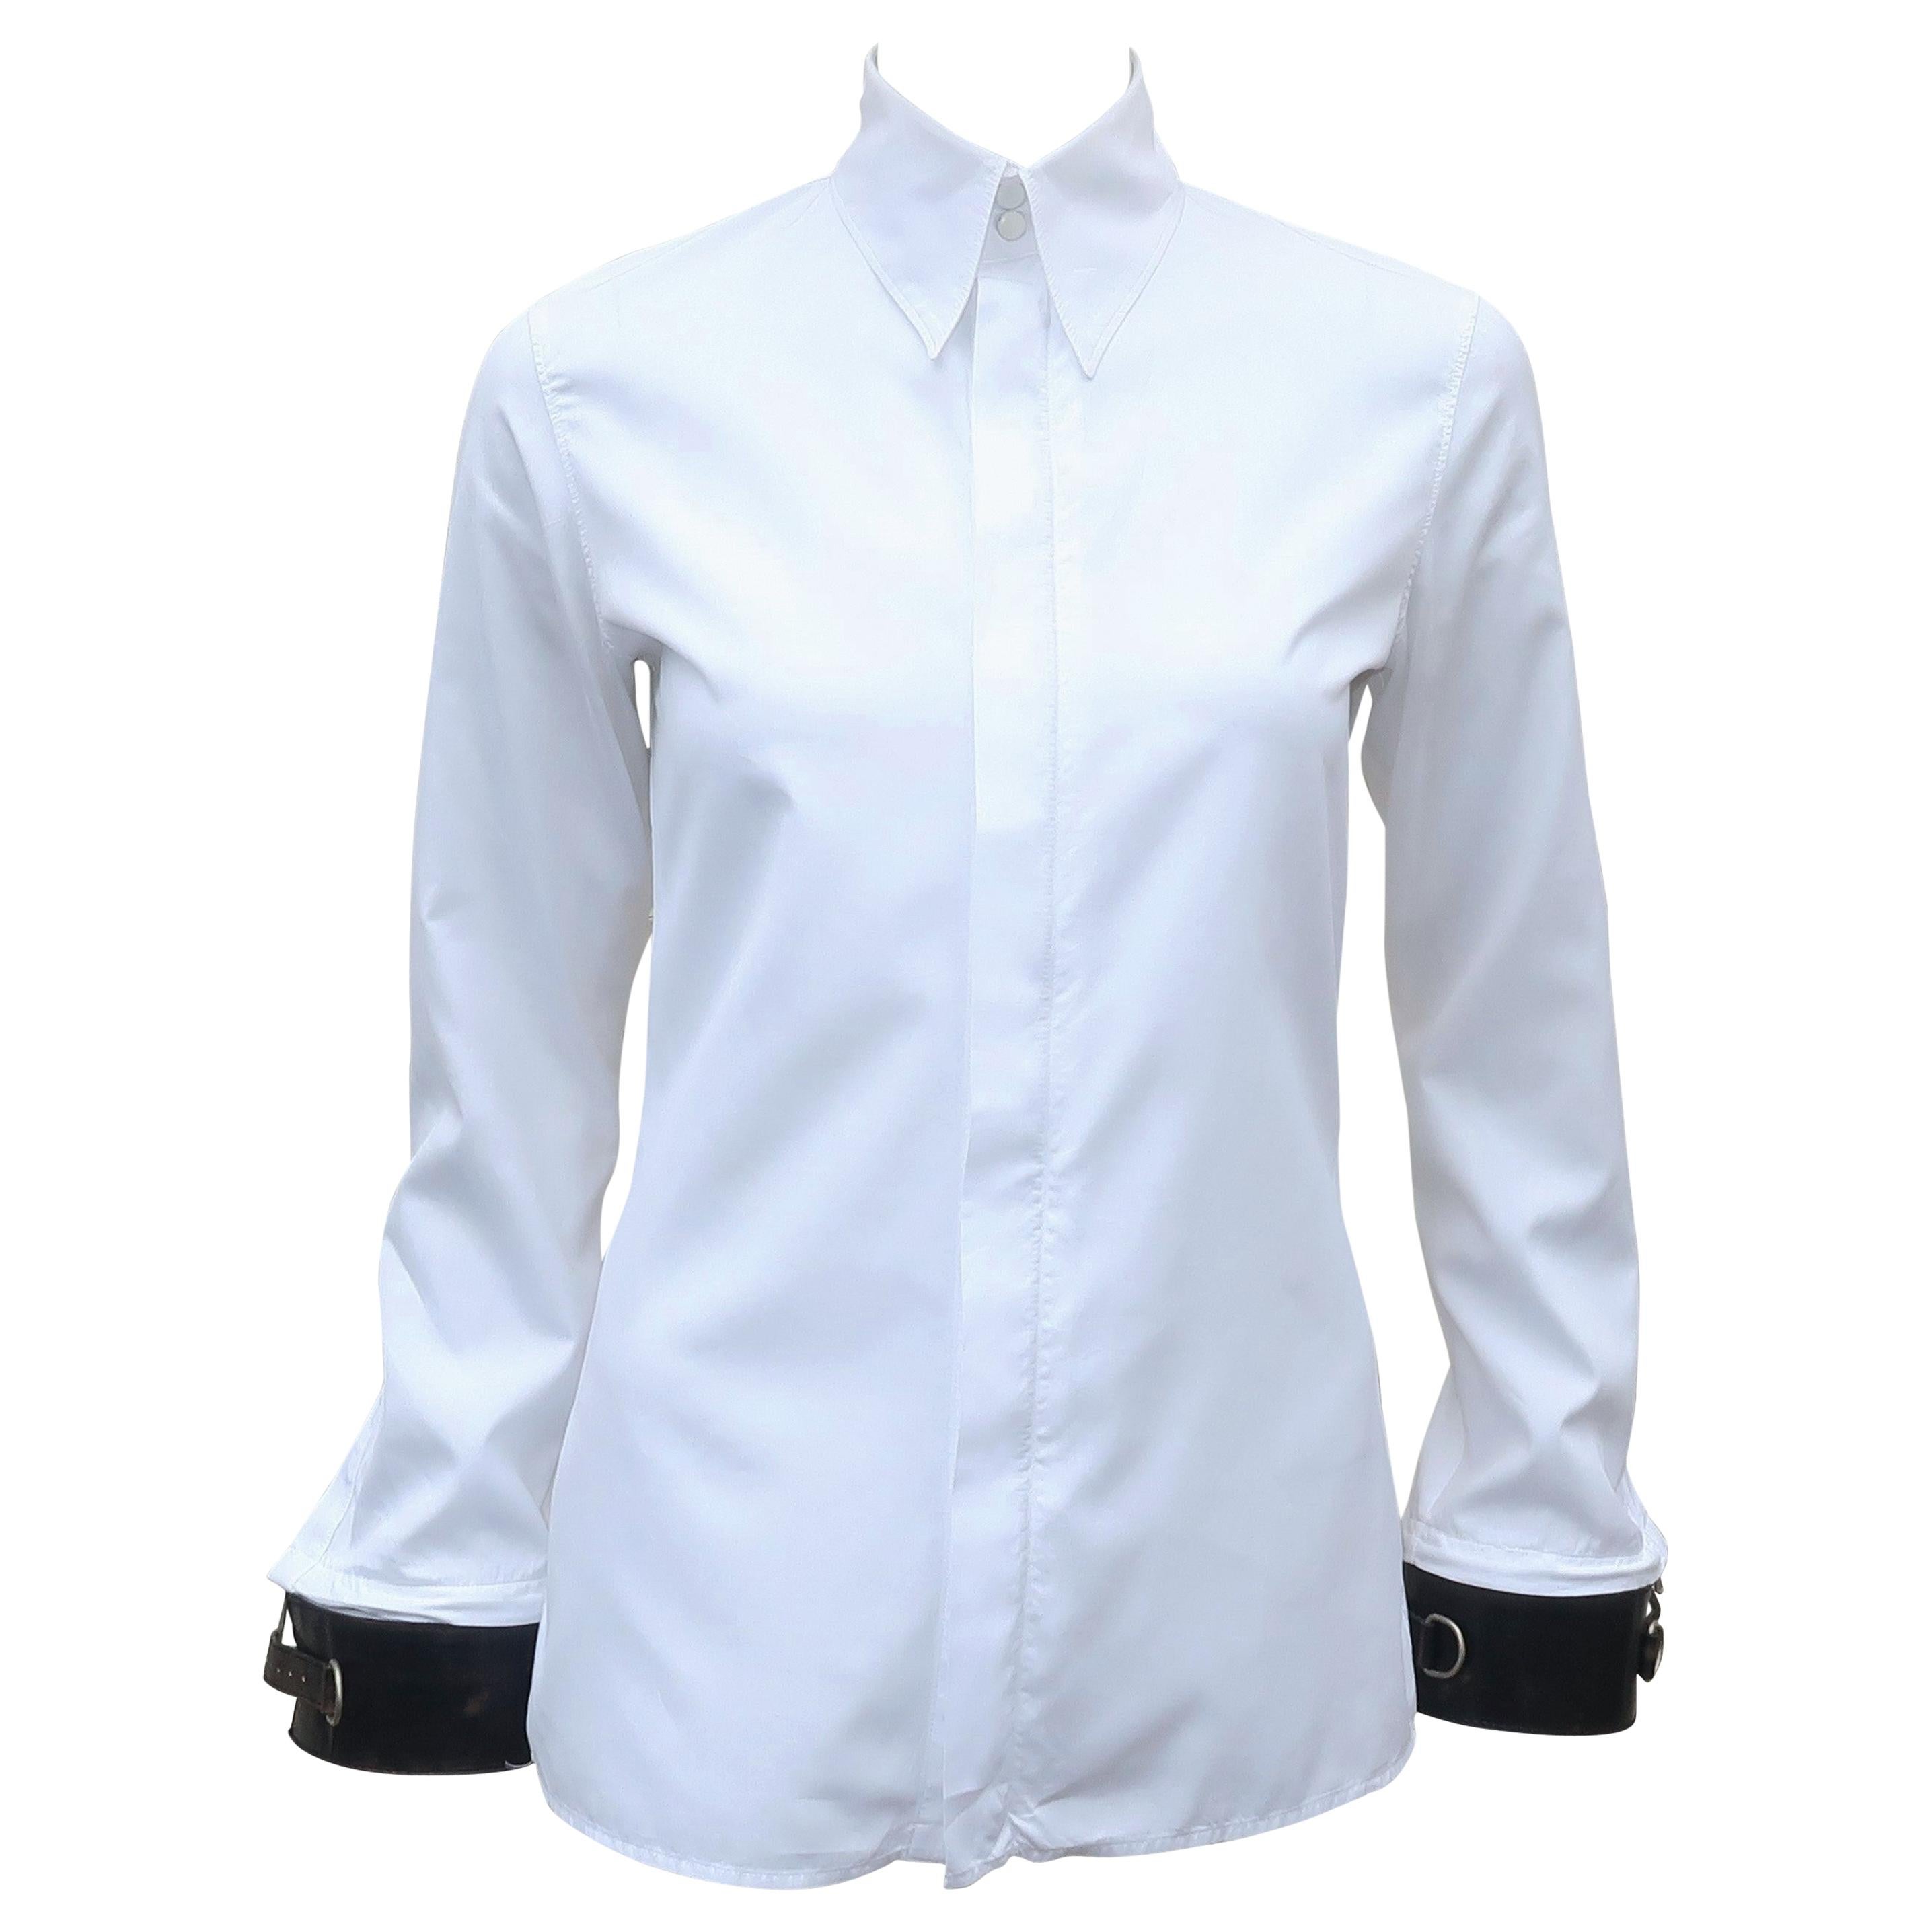 Jean Paul Gaultier White Shirt With Black Leather Restraint Cuffs 